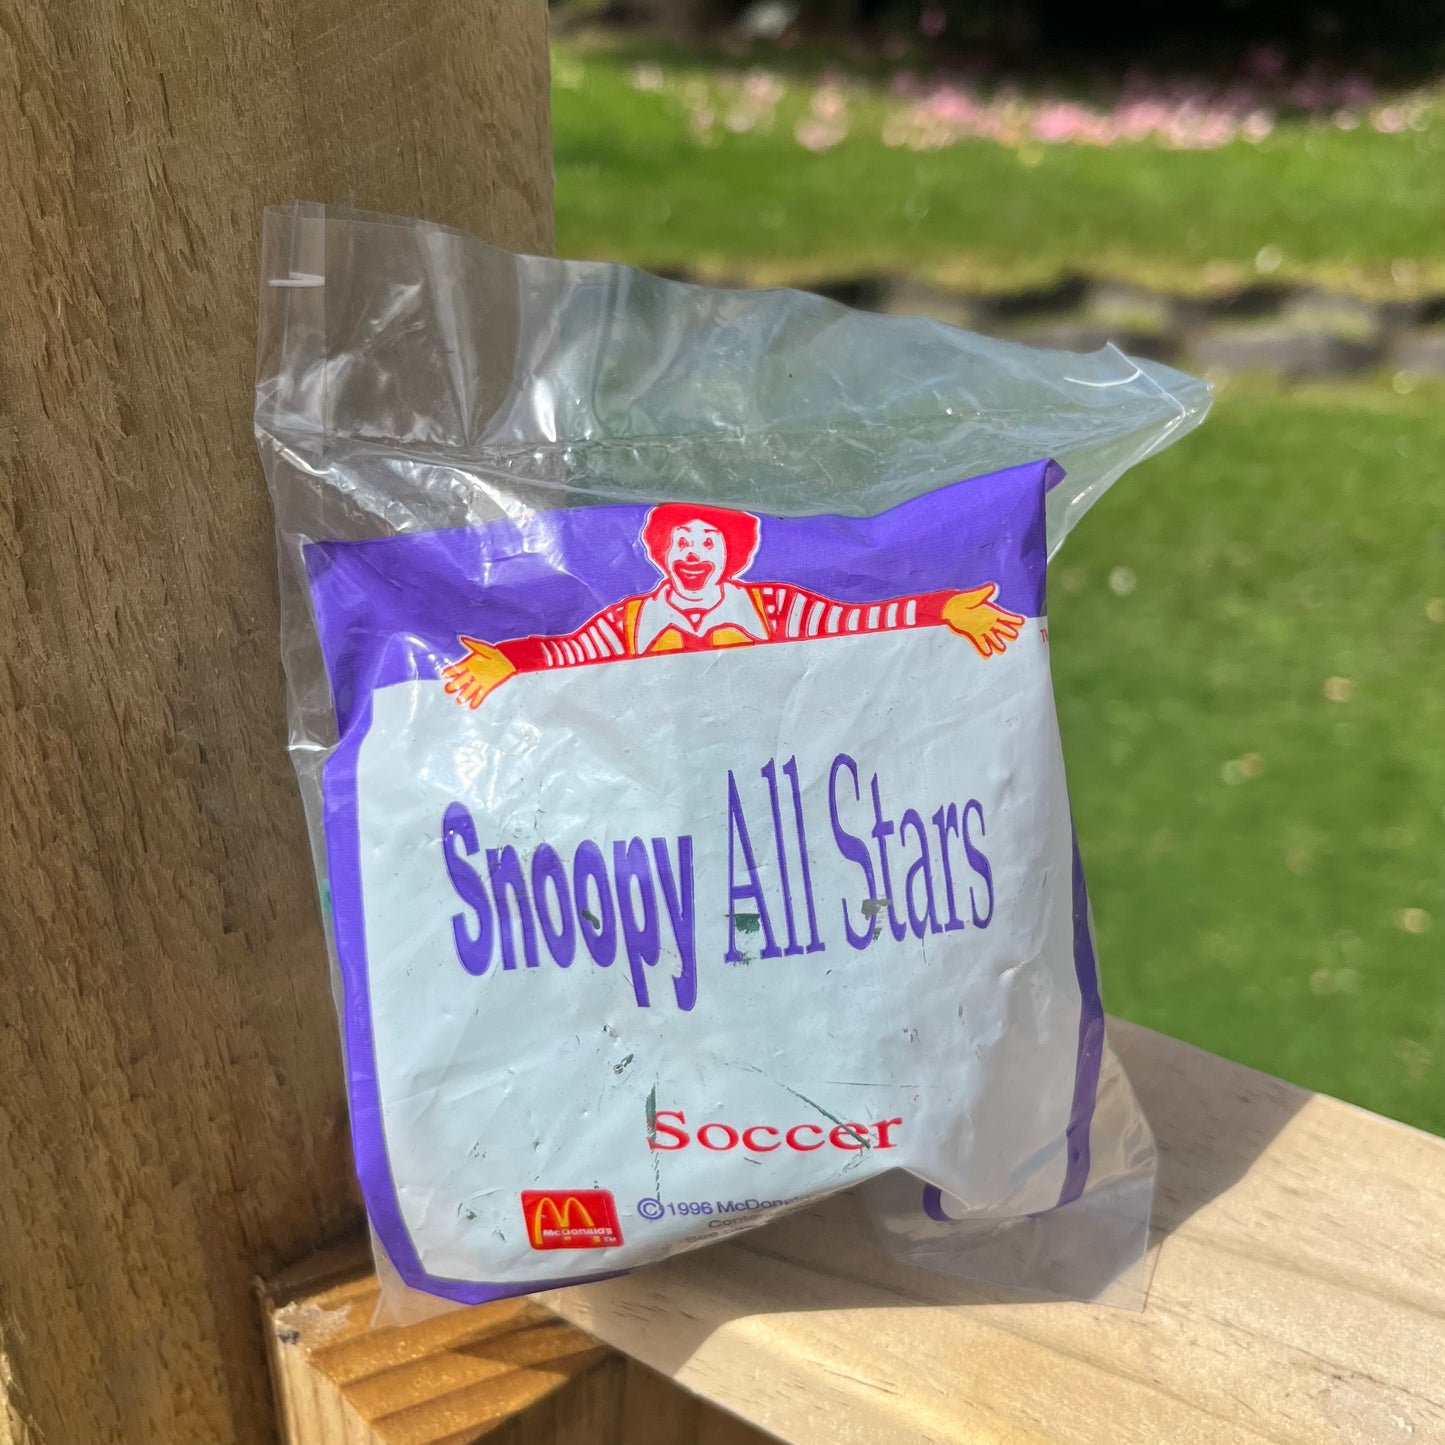 Snoopy (All stars Soccer) 1996 Mc Donald’s Toy